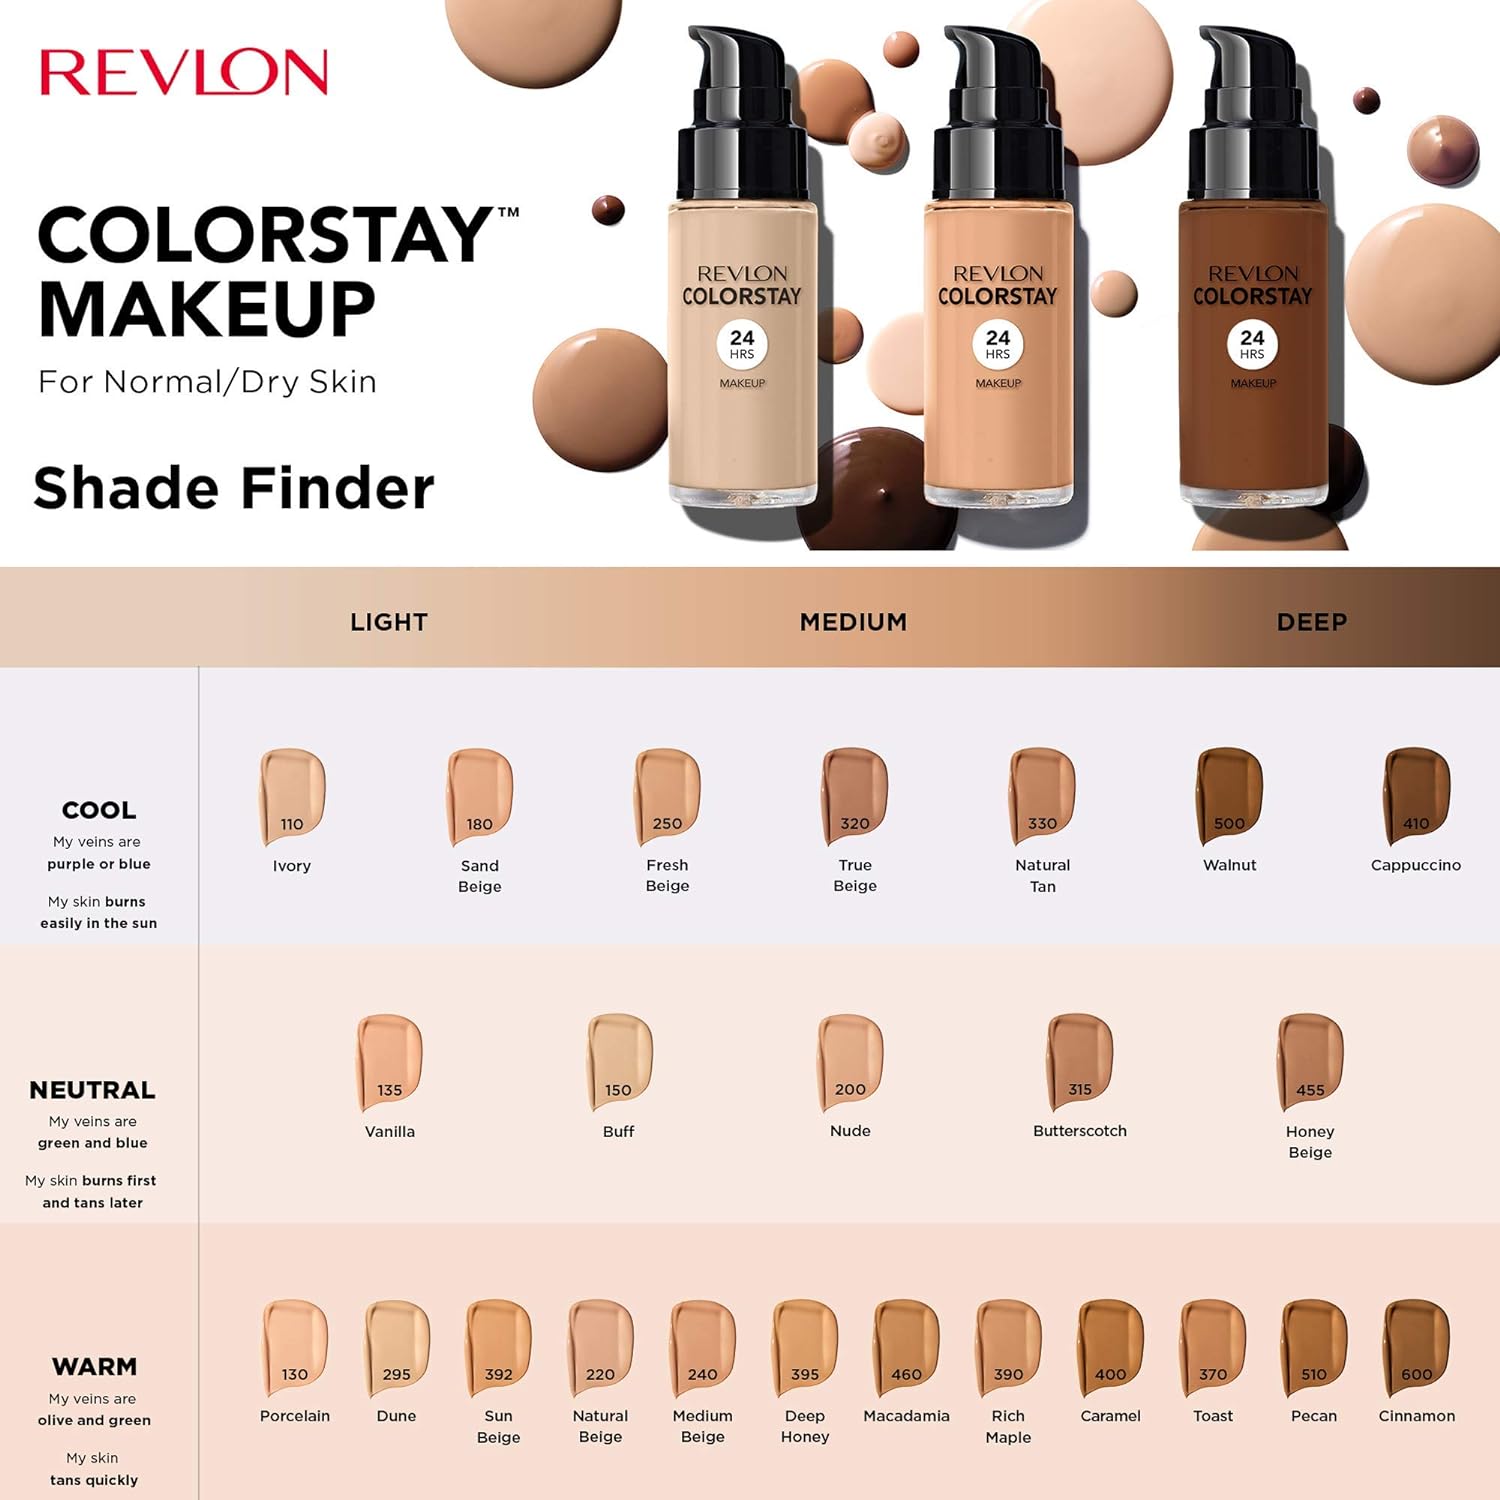 Revlon ColorStay Foundation SPF 20 for normal to dry skin - 370 Toast 30ml